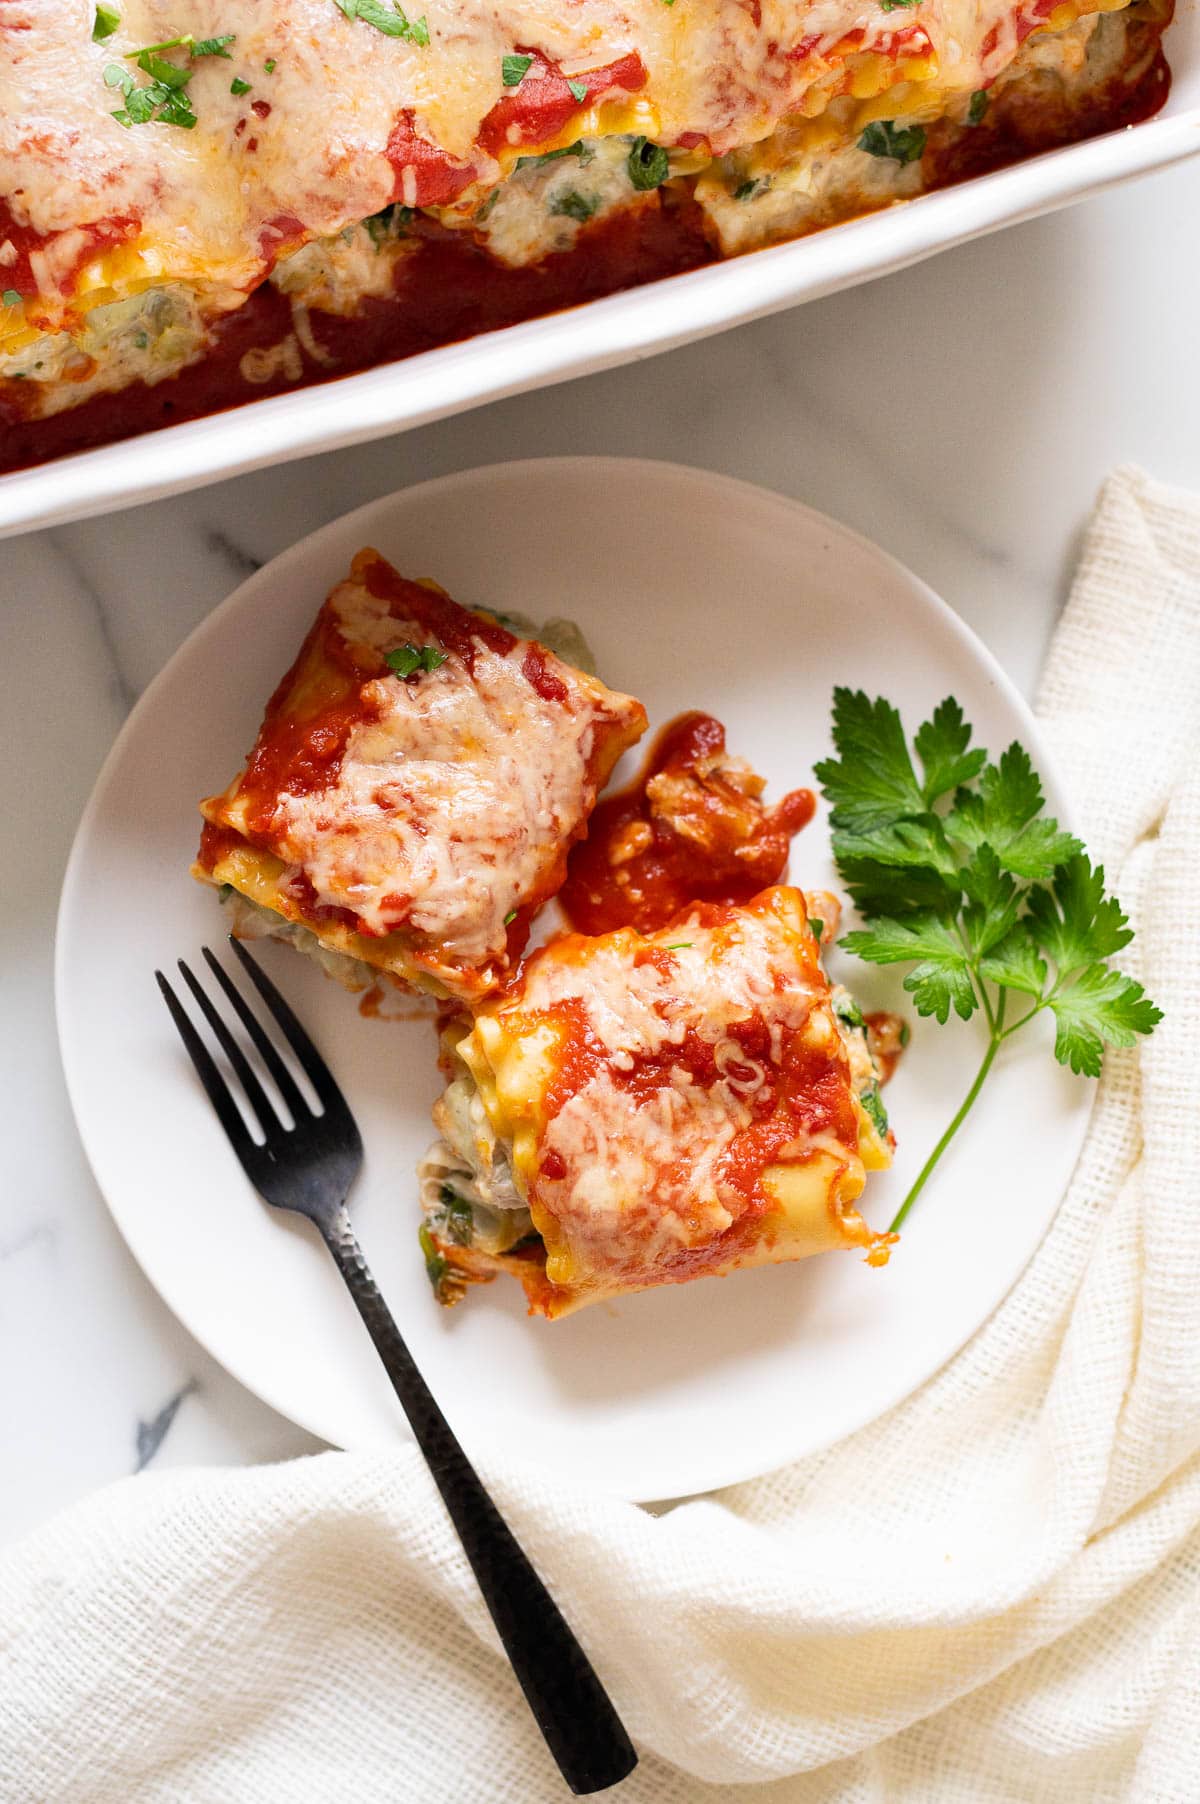 Two chicken lasagna roll-ups with sauce on a plate and parsley. More lasagna rolls in a baking dish.